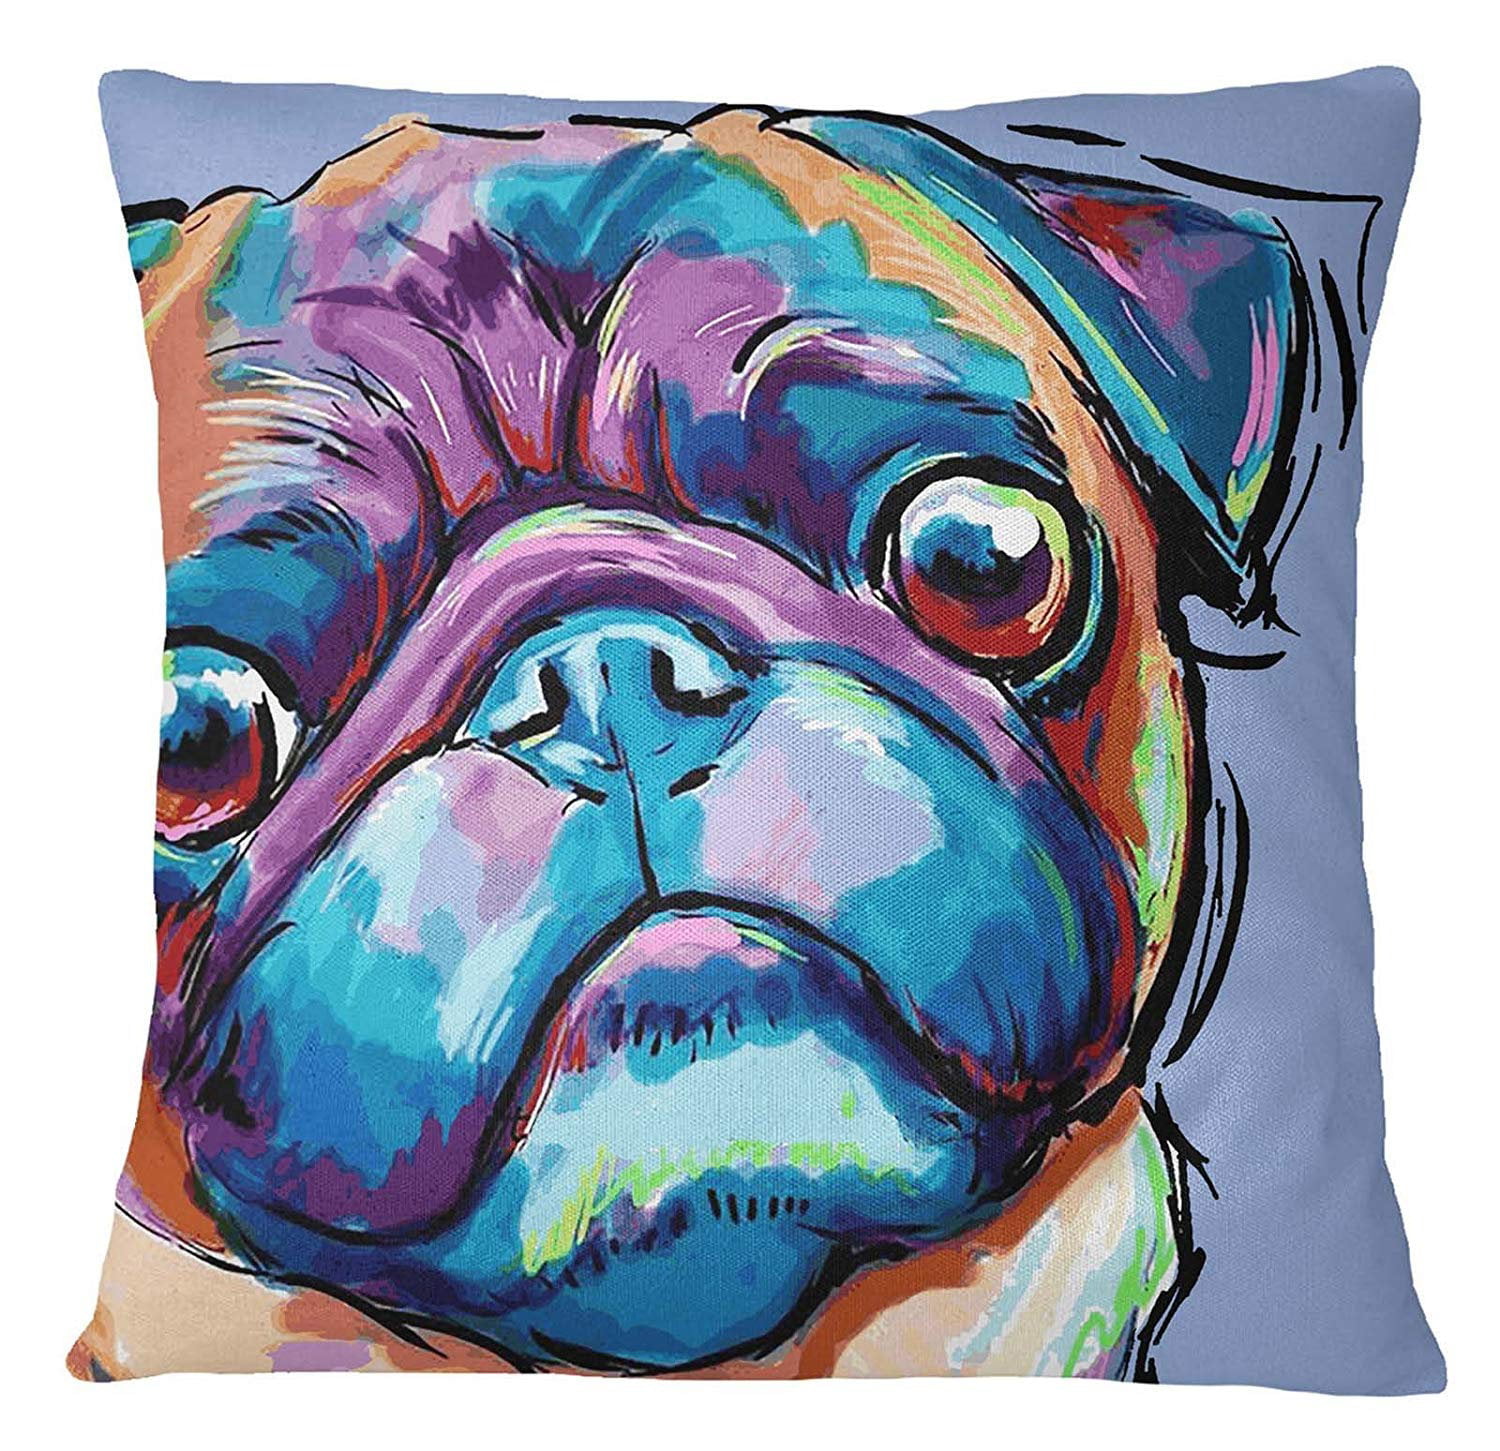 18inch Pug Soft Cushion Cover Home Decor Cotton Linen Blended Throw Pillow Case 